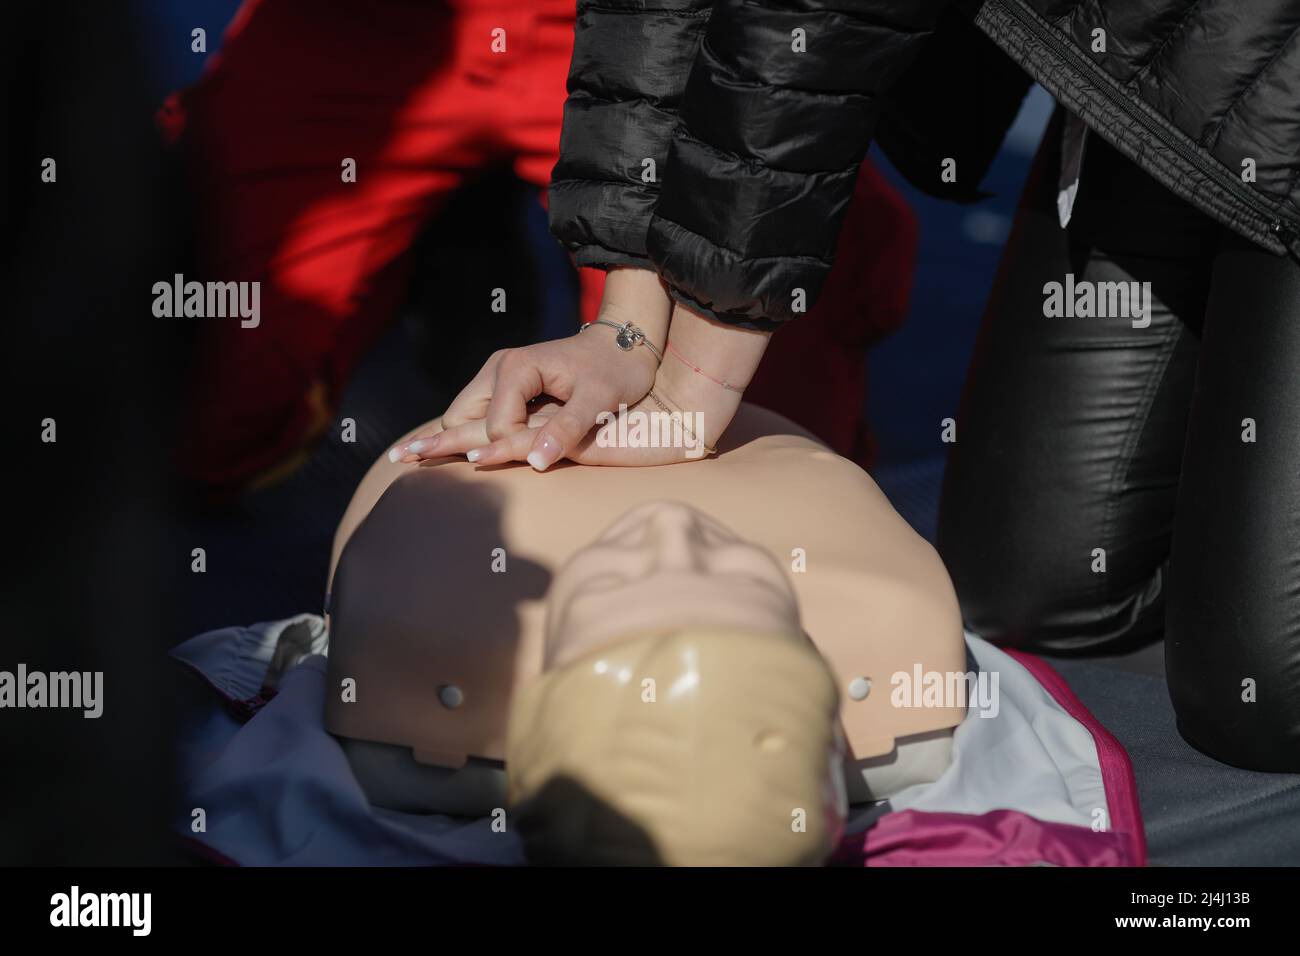 Details with the hands of an emergency medical services worker performing cardiopulmonary resuscitation (CPR) on a mannequin for educational purposes. Stock Photo